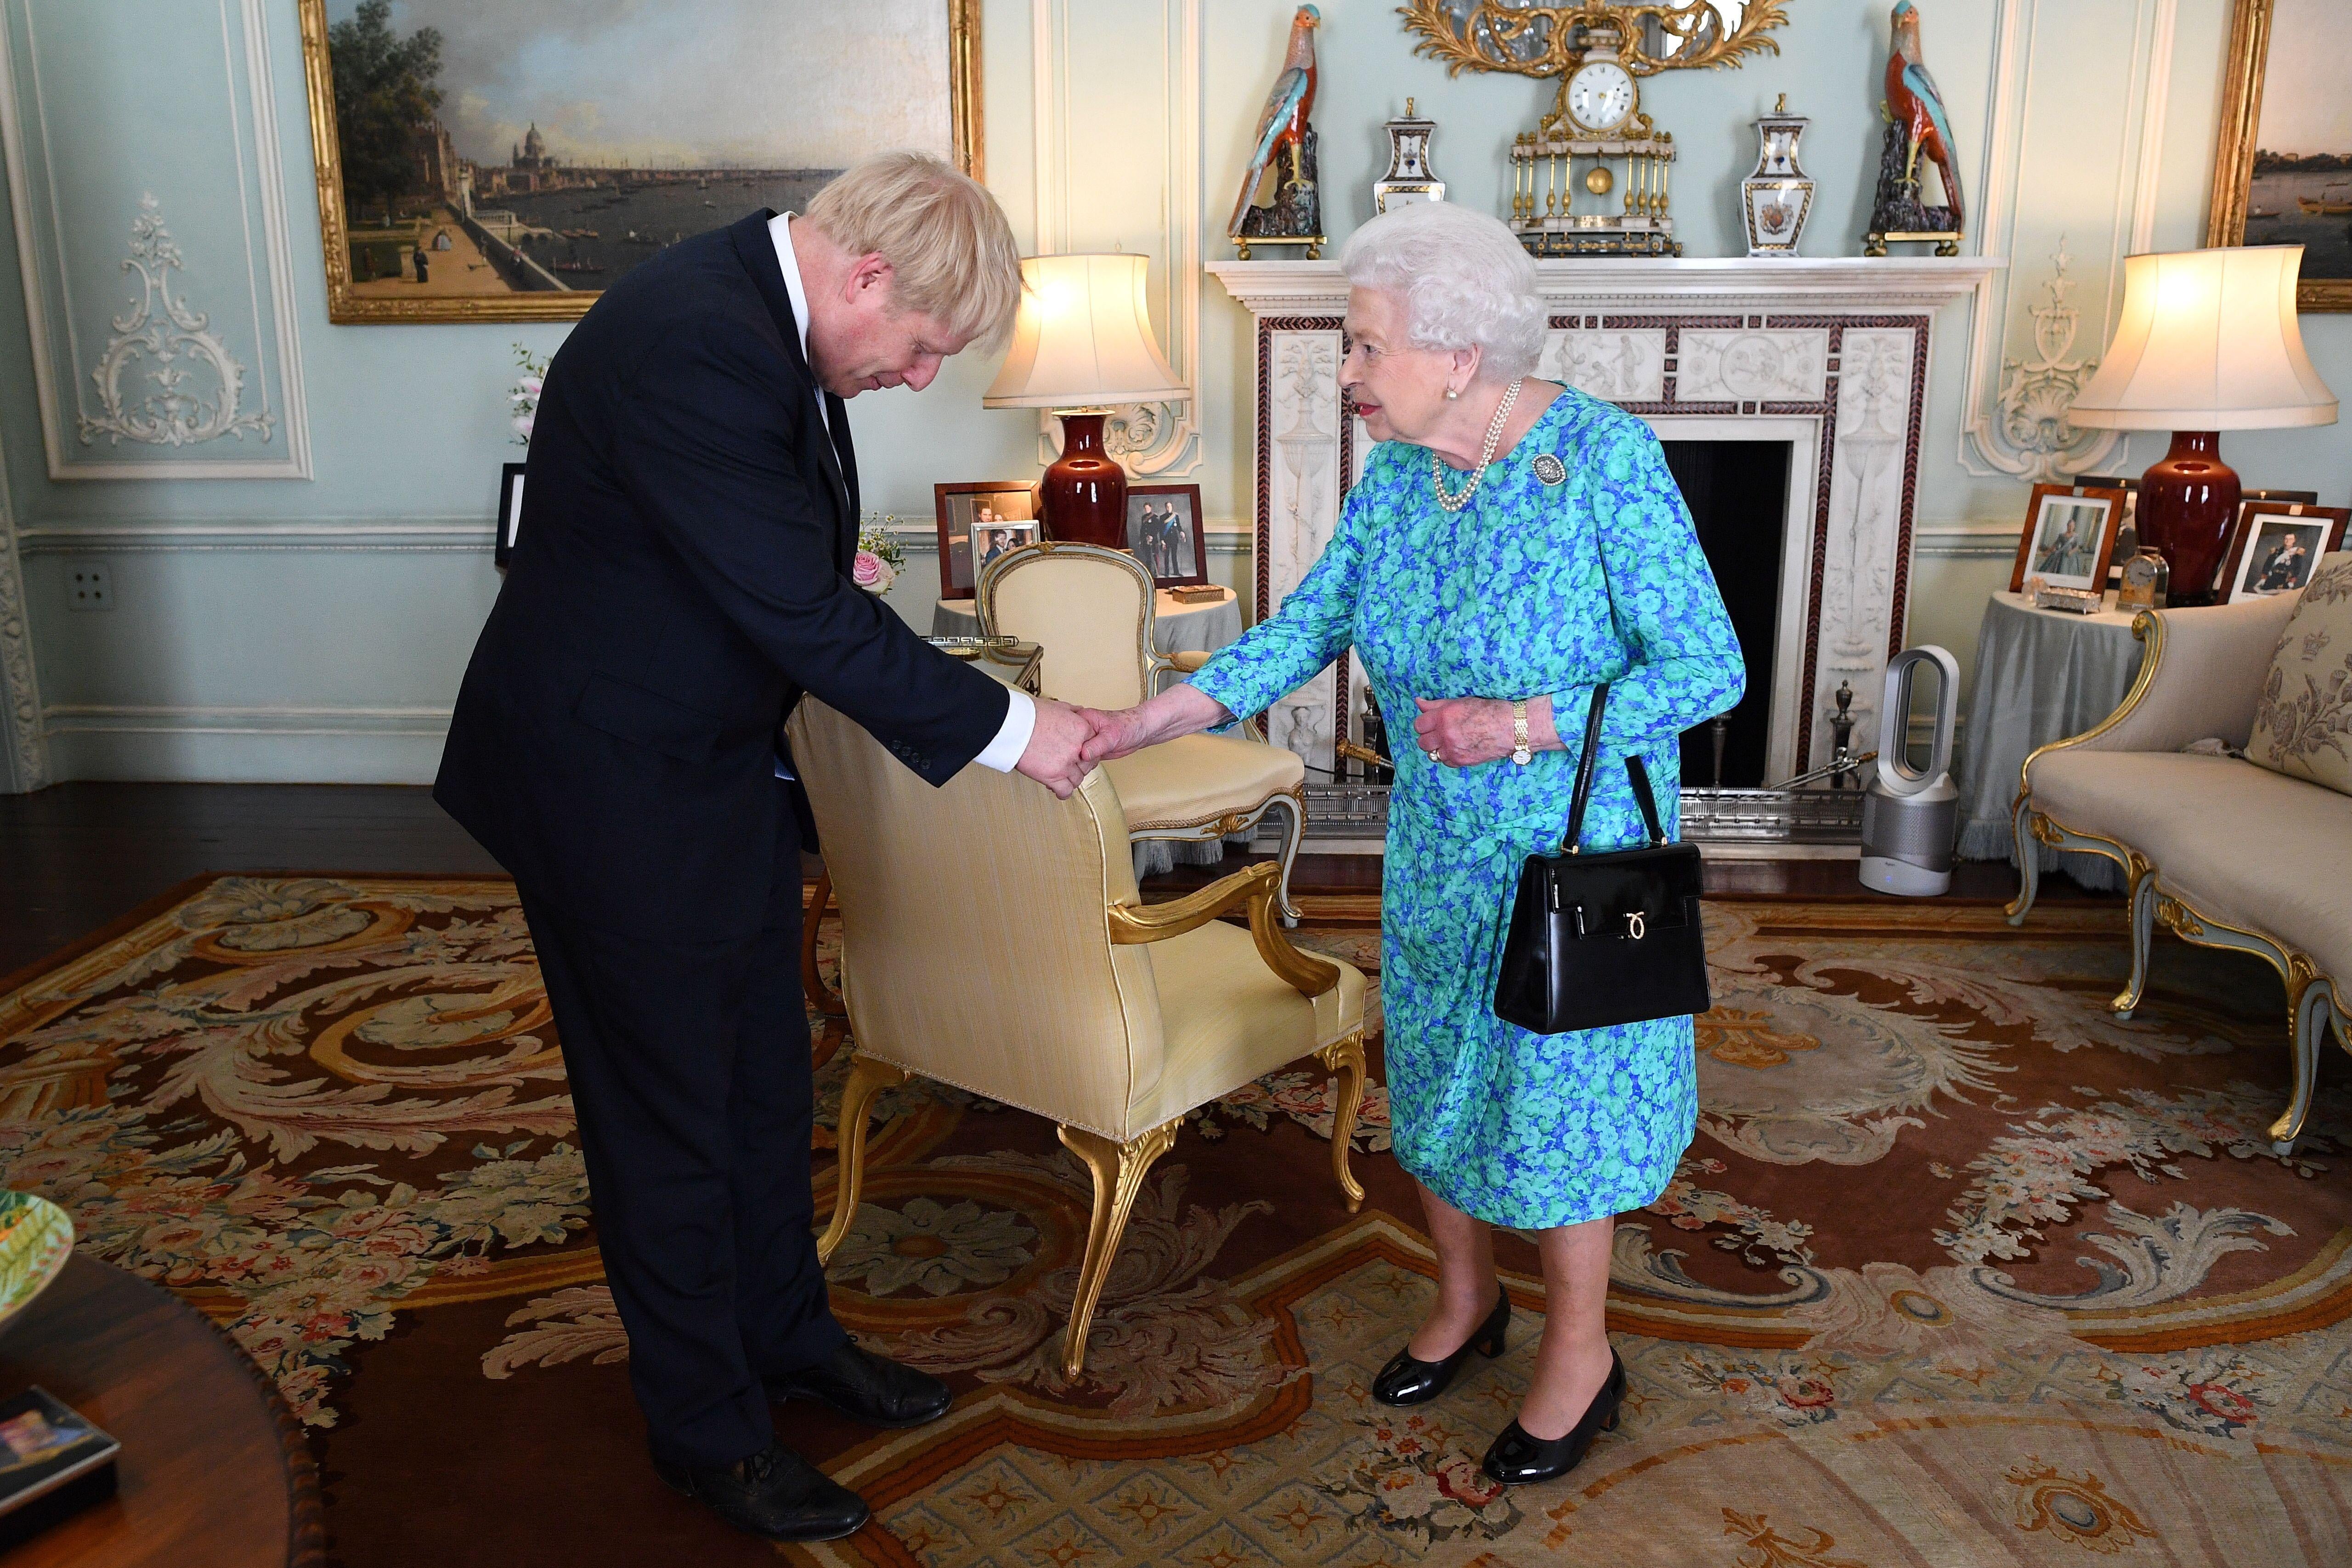 Boris Johnson meets the queen in Buckingham Palace after becoming prime minister in July.